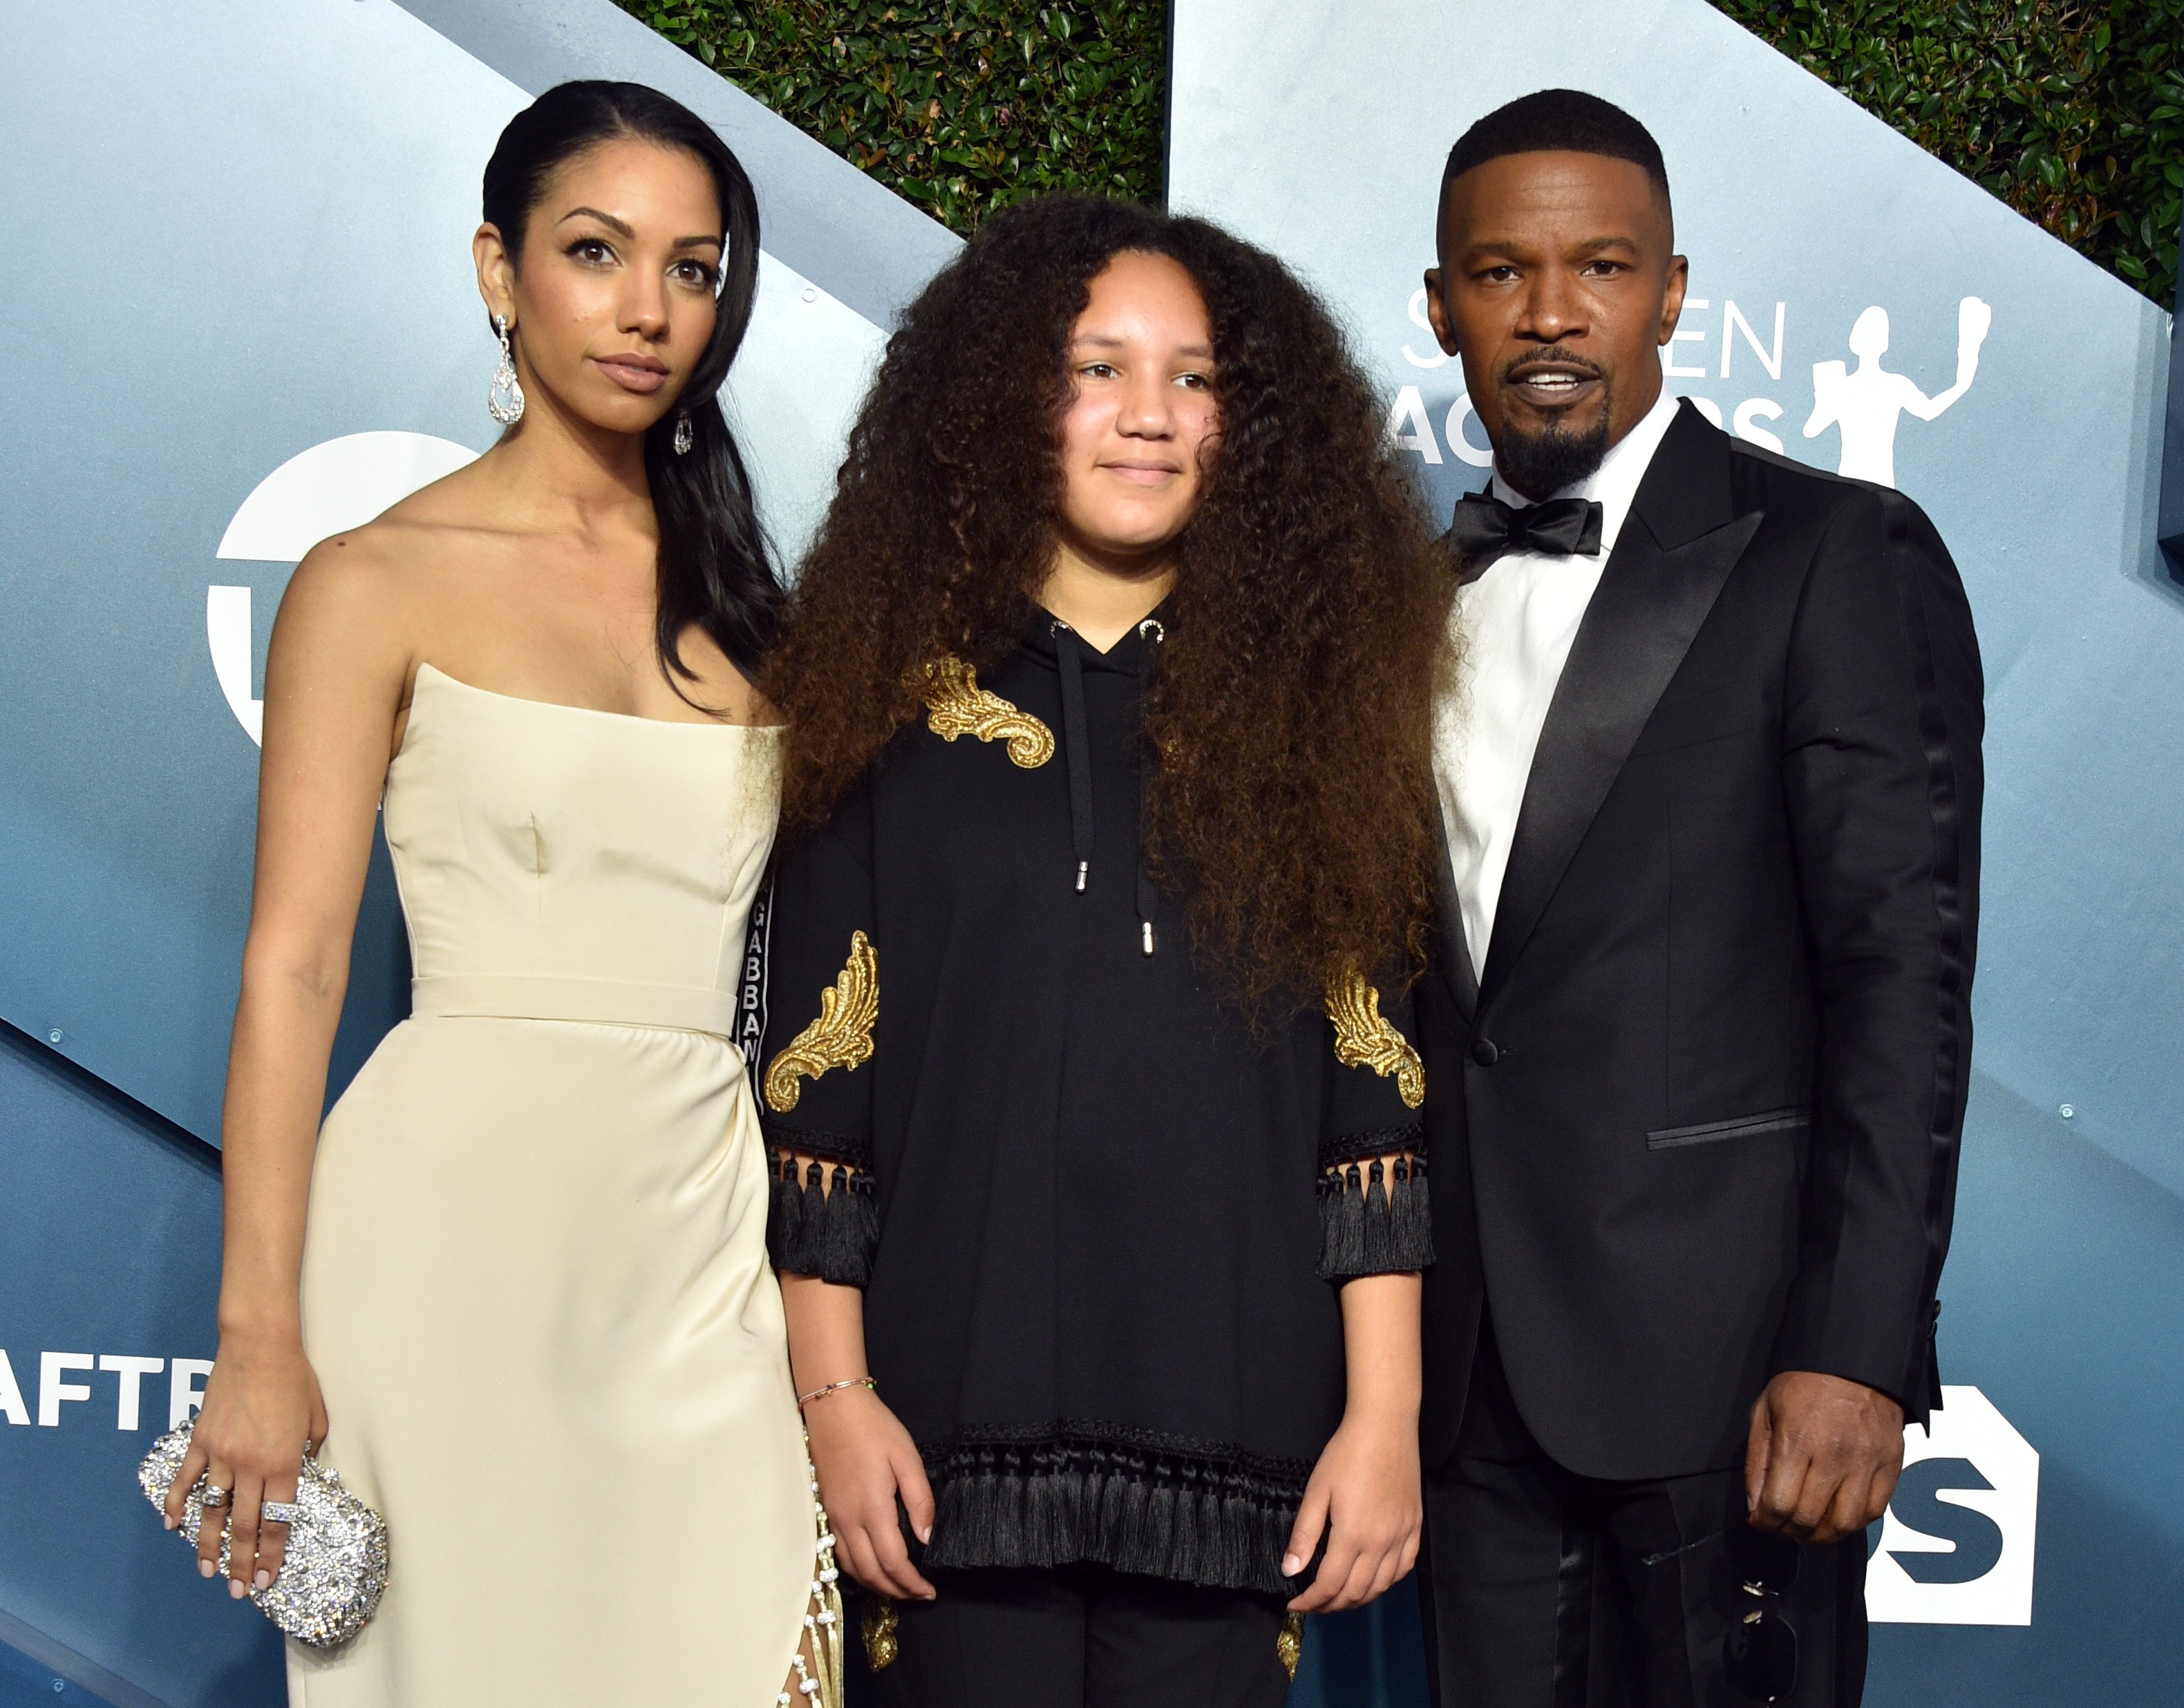 Corinne Foxx, Annalise Bishop and Jamie Foxx attend the 26th Annual Screen Actors Guild Awards on January 19, 2020 in Los Angeles, California. | Source: Getty Images